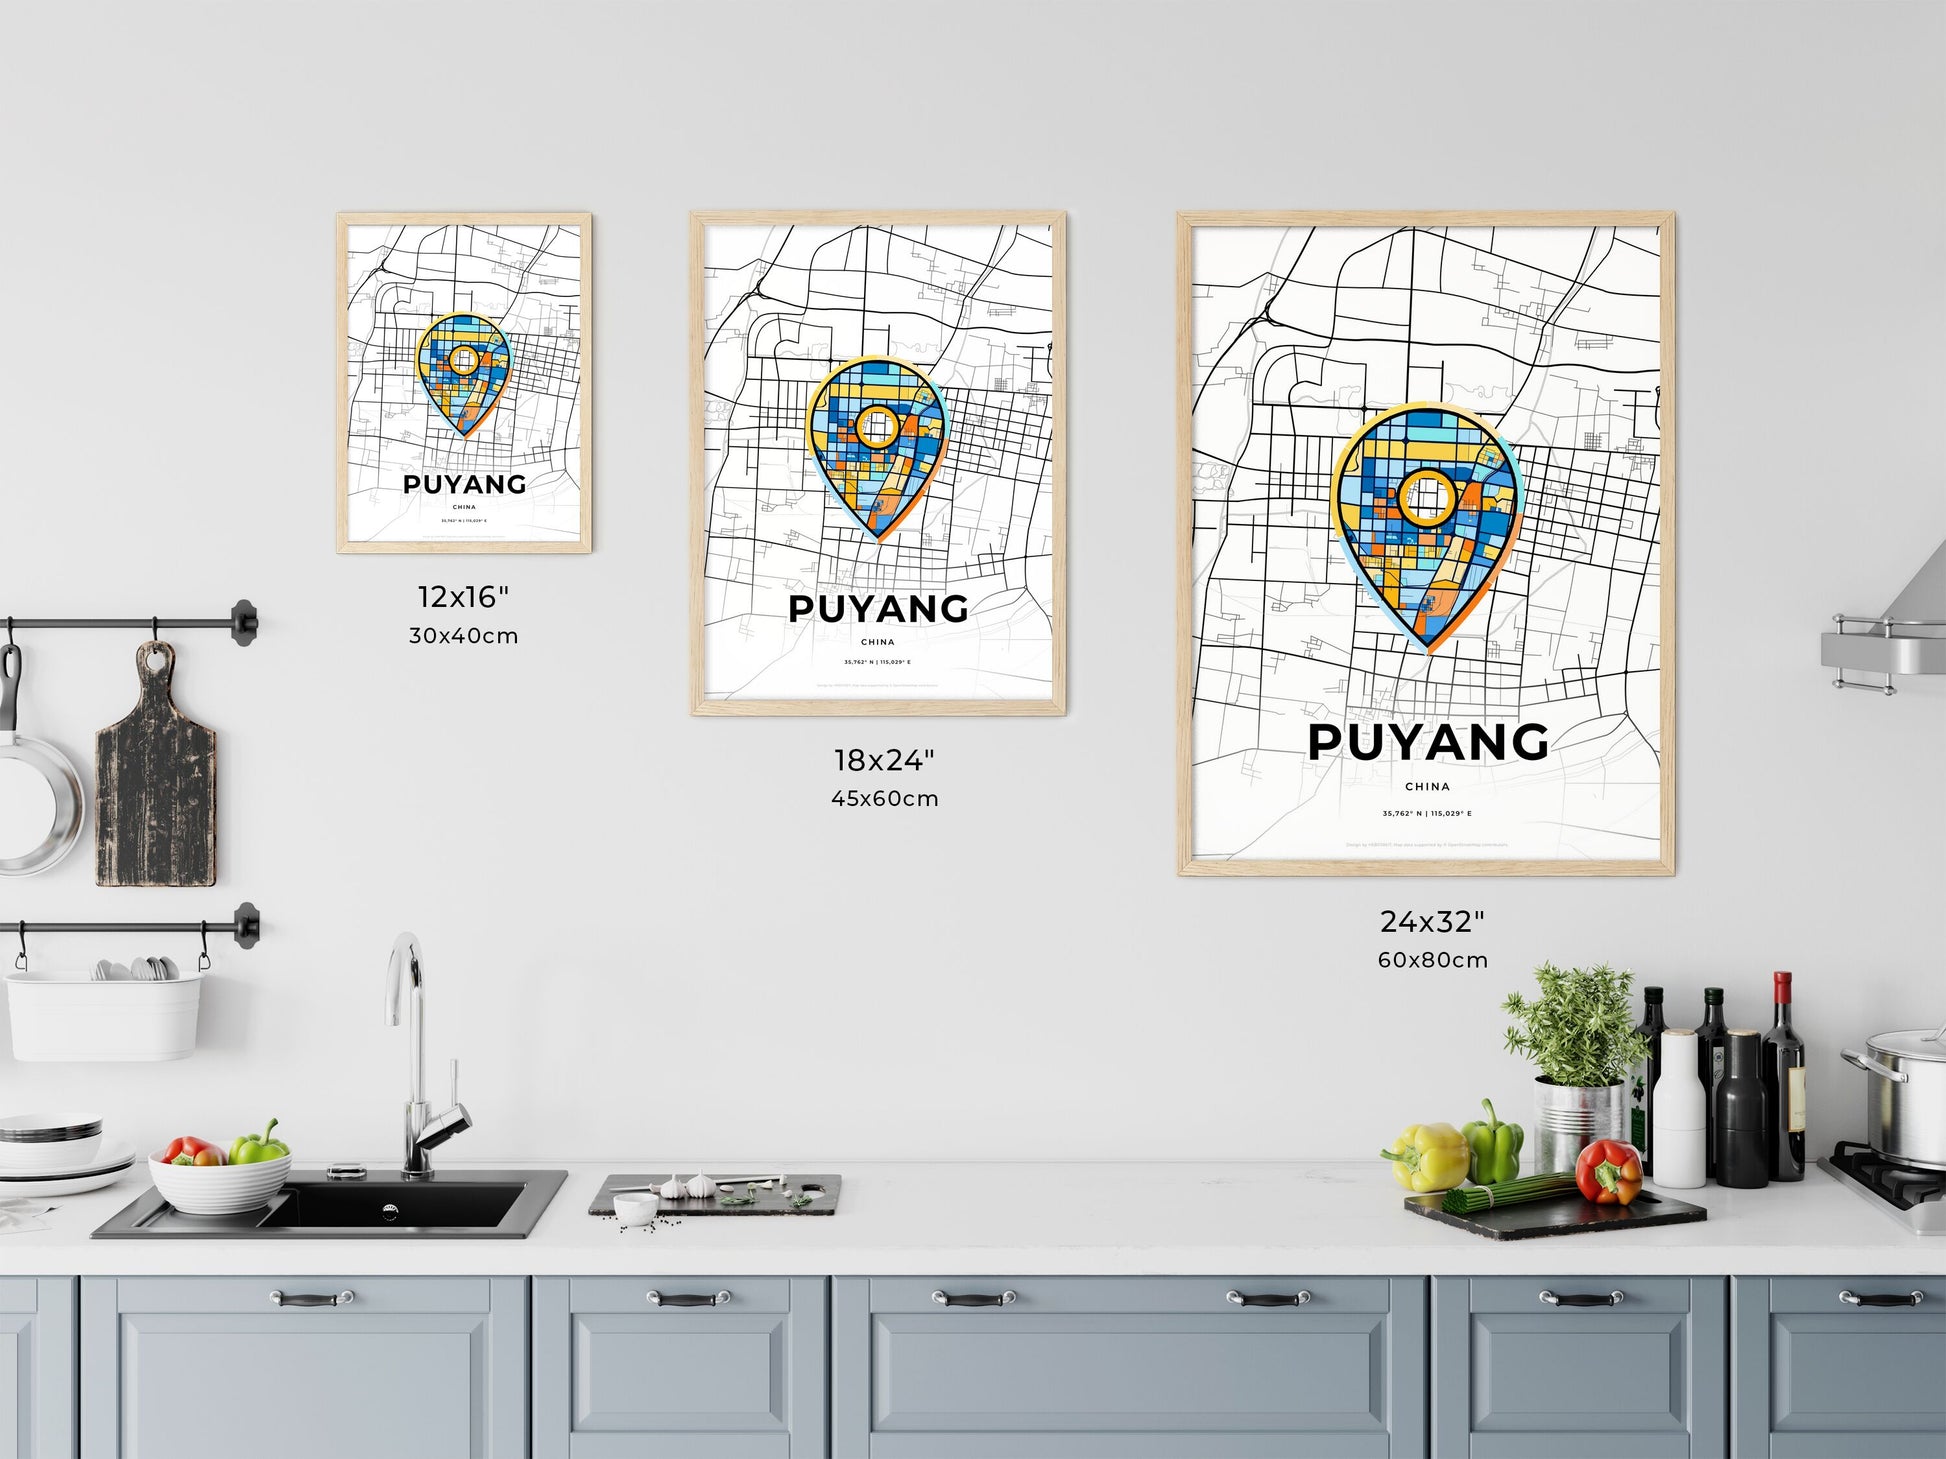 PUYANG CHINA minimal art map with a colorful icon.